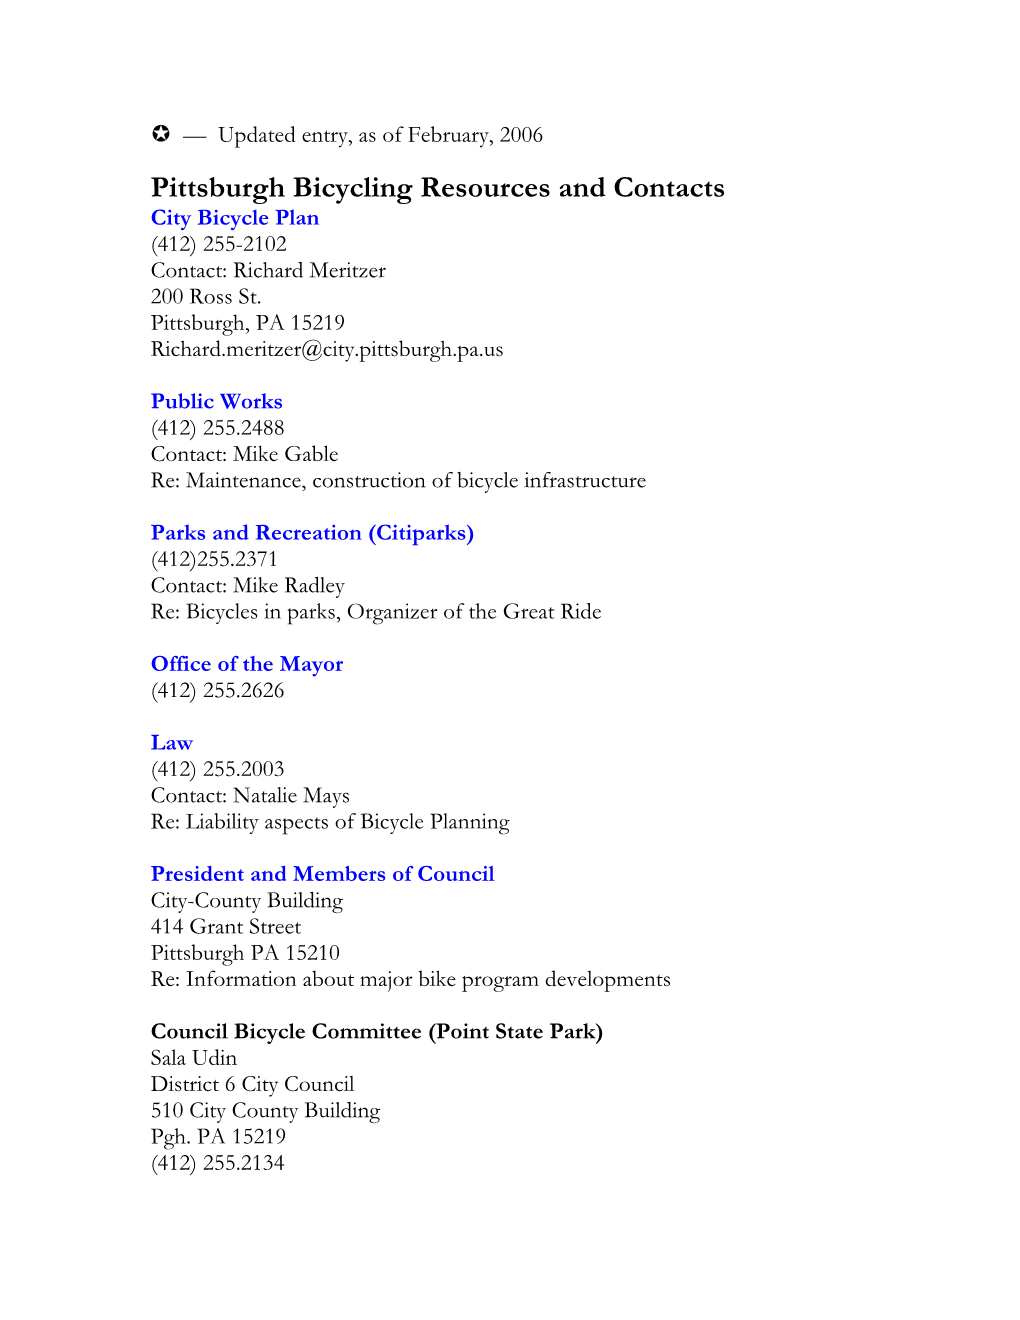 Pittsburgh Bicycling Resources and Contacts City Bicycle Plan (412) 255-2102 Contact: Richard Meritzer 200 Ross St